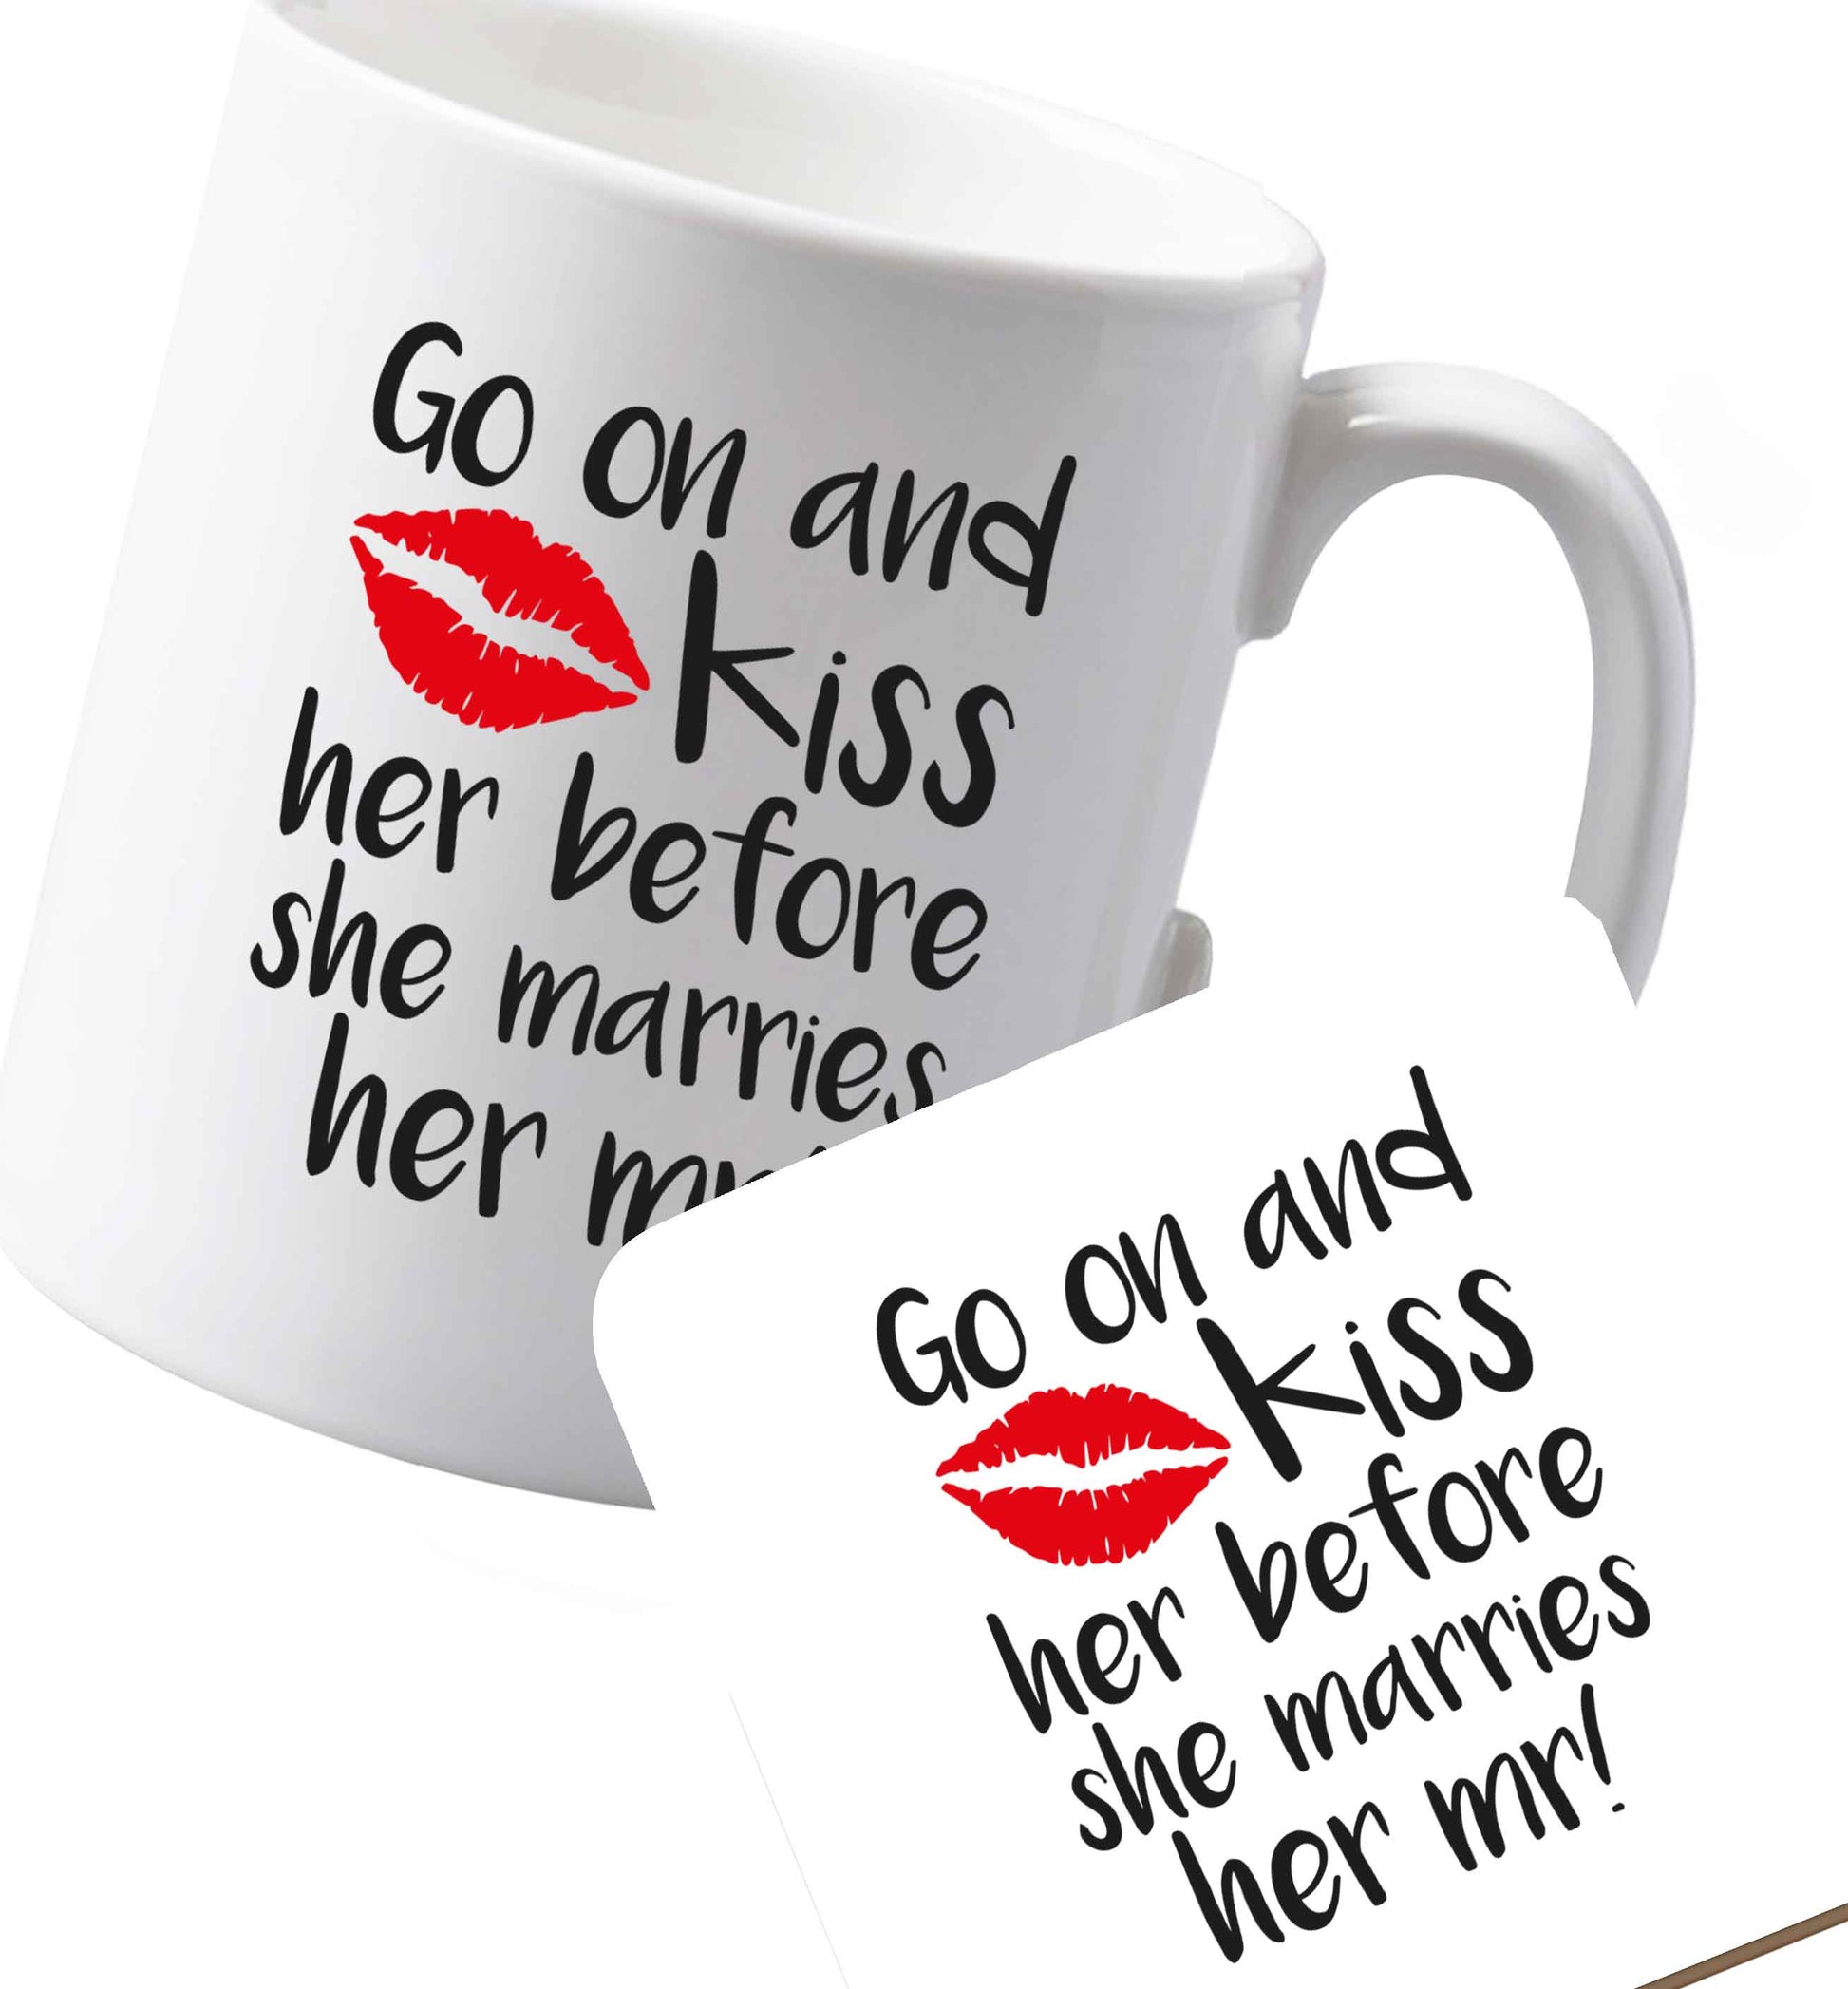 10 oz Ceramic mug and coaster Kiss her before she marries her mr!   both sides